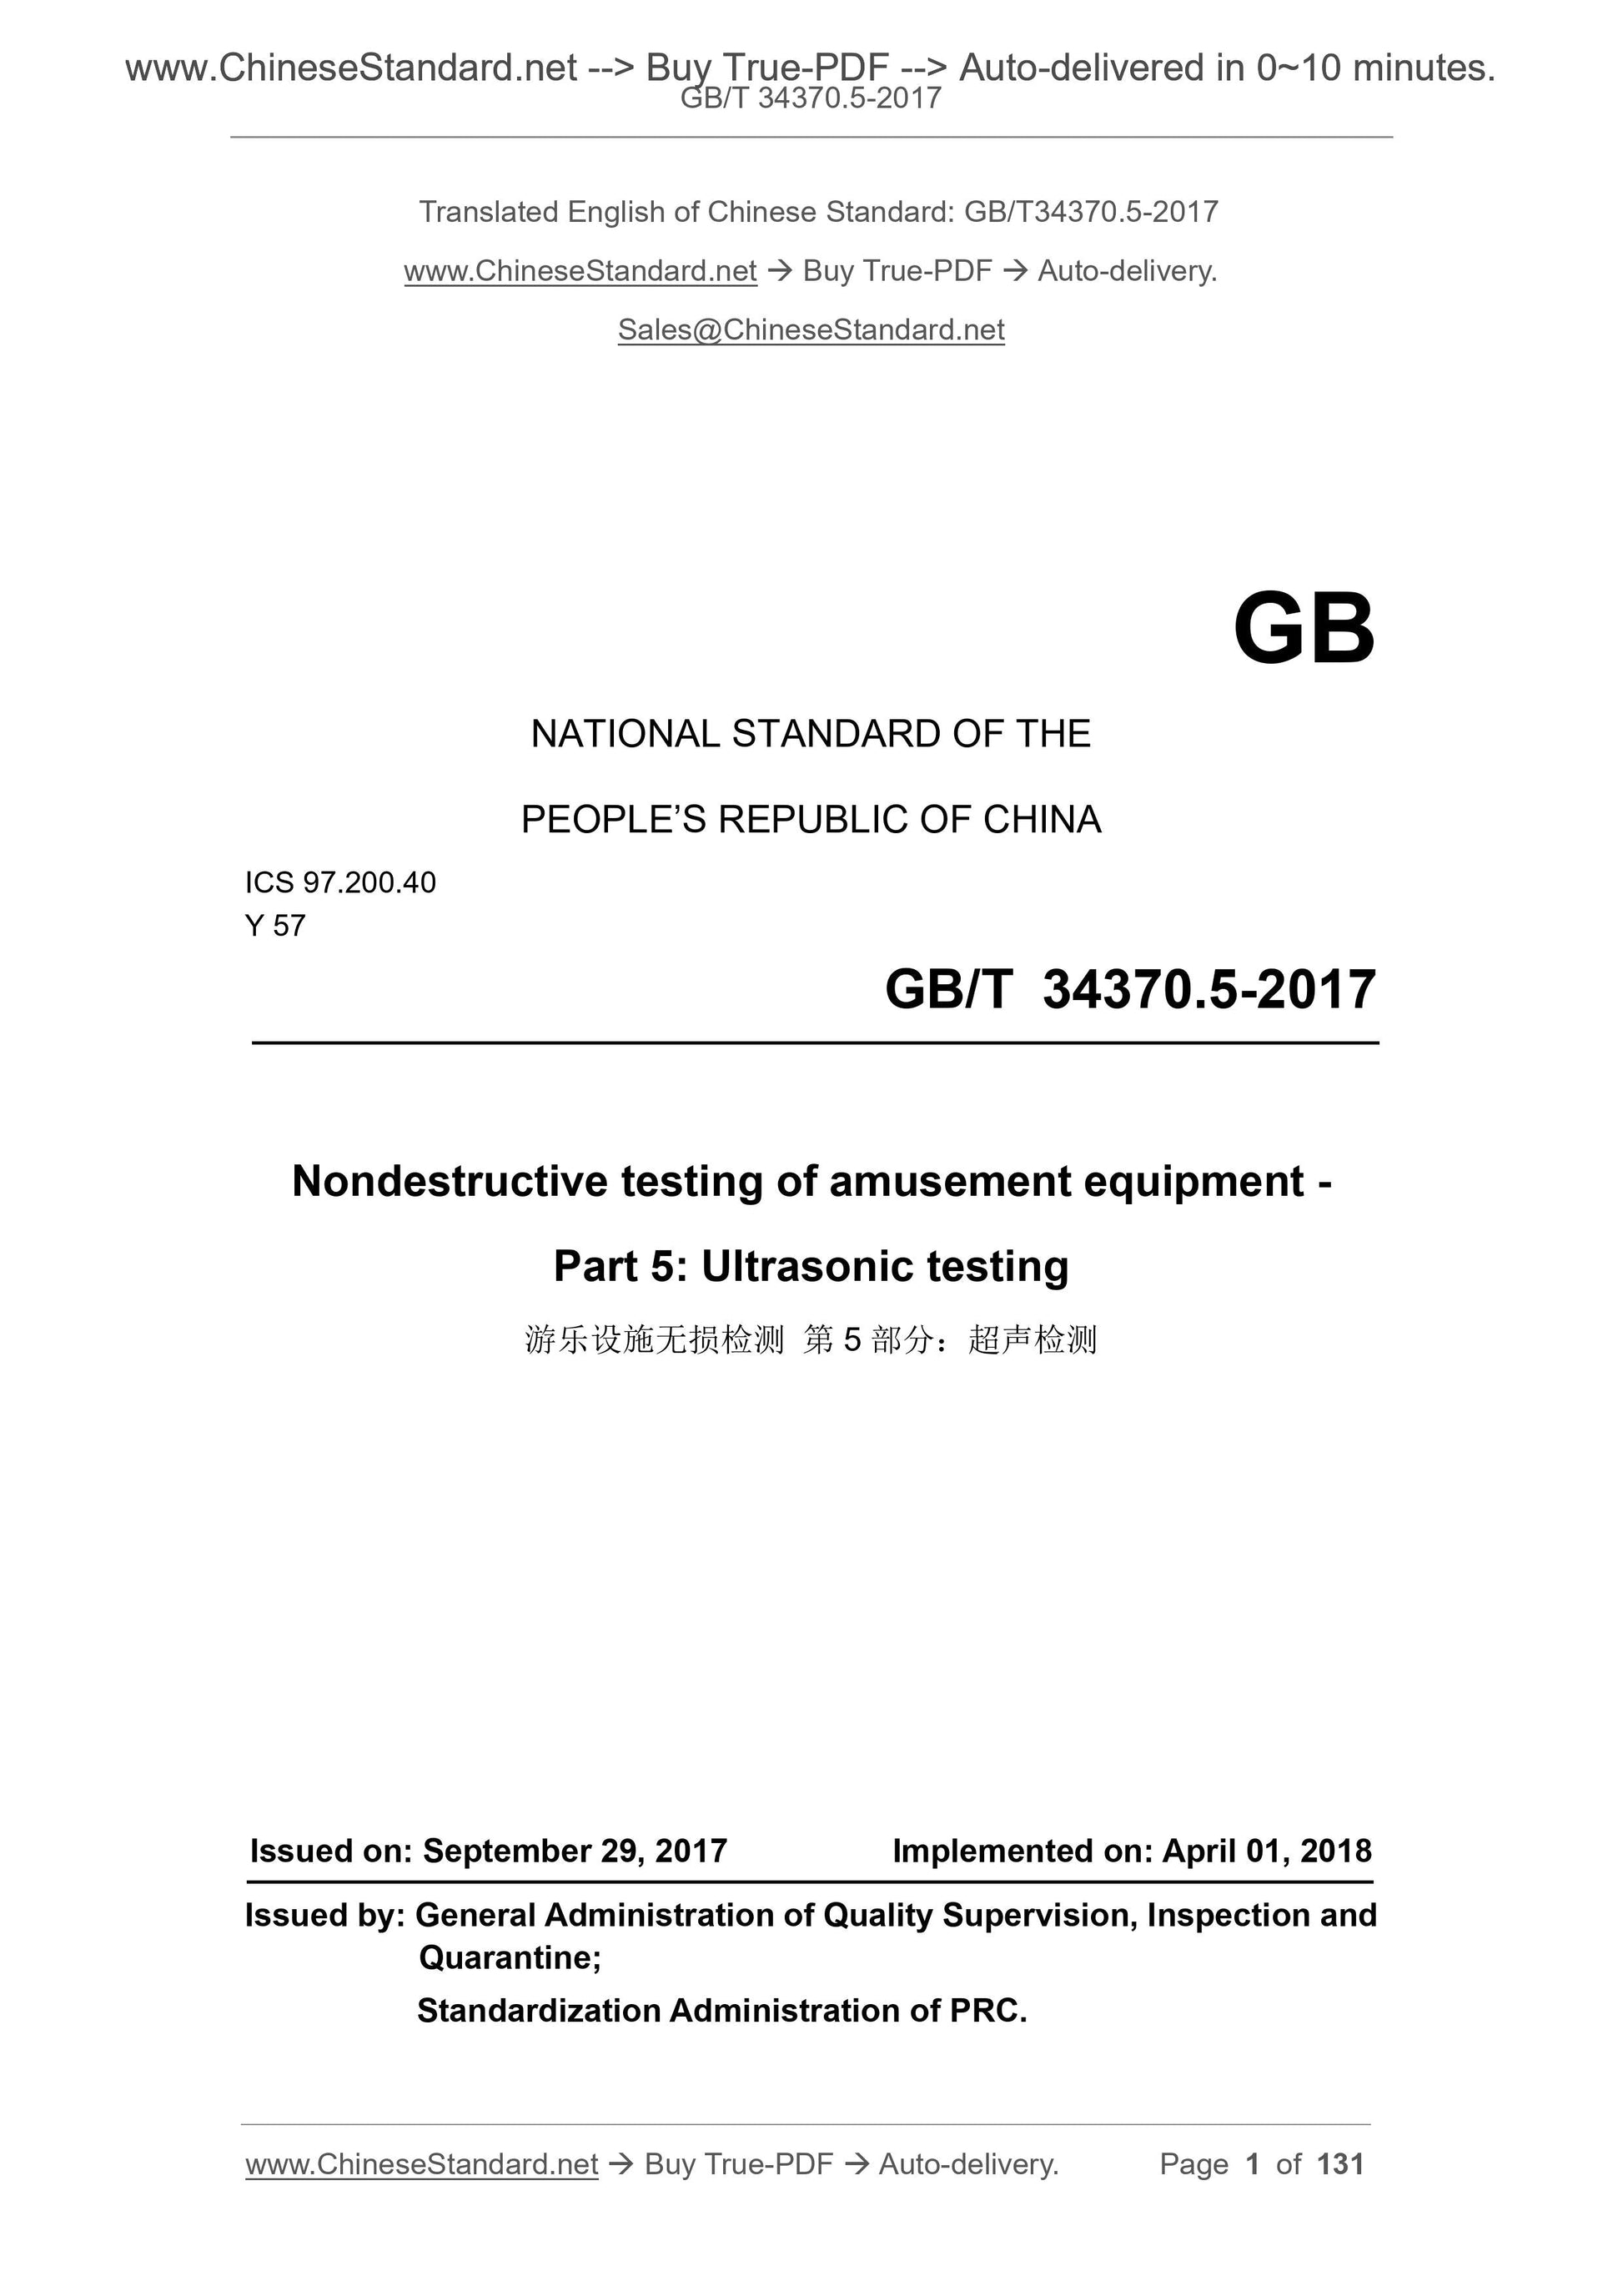 GB/T 34370.5-2017 Page 1